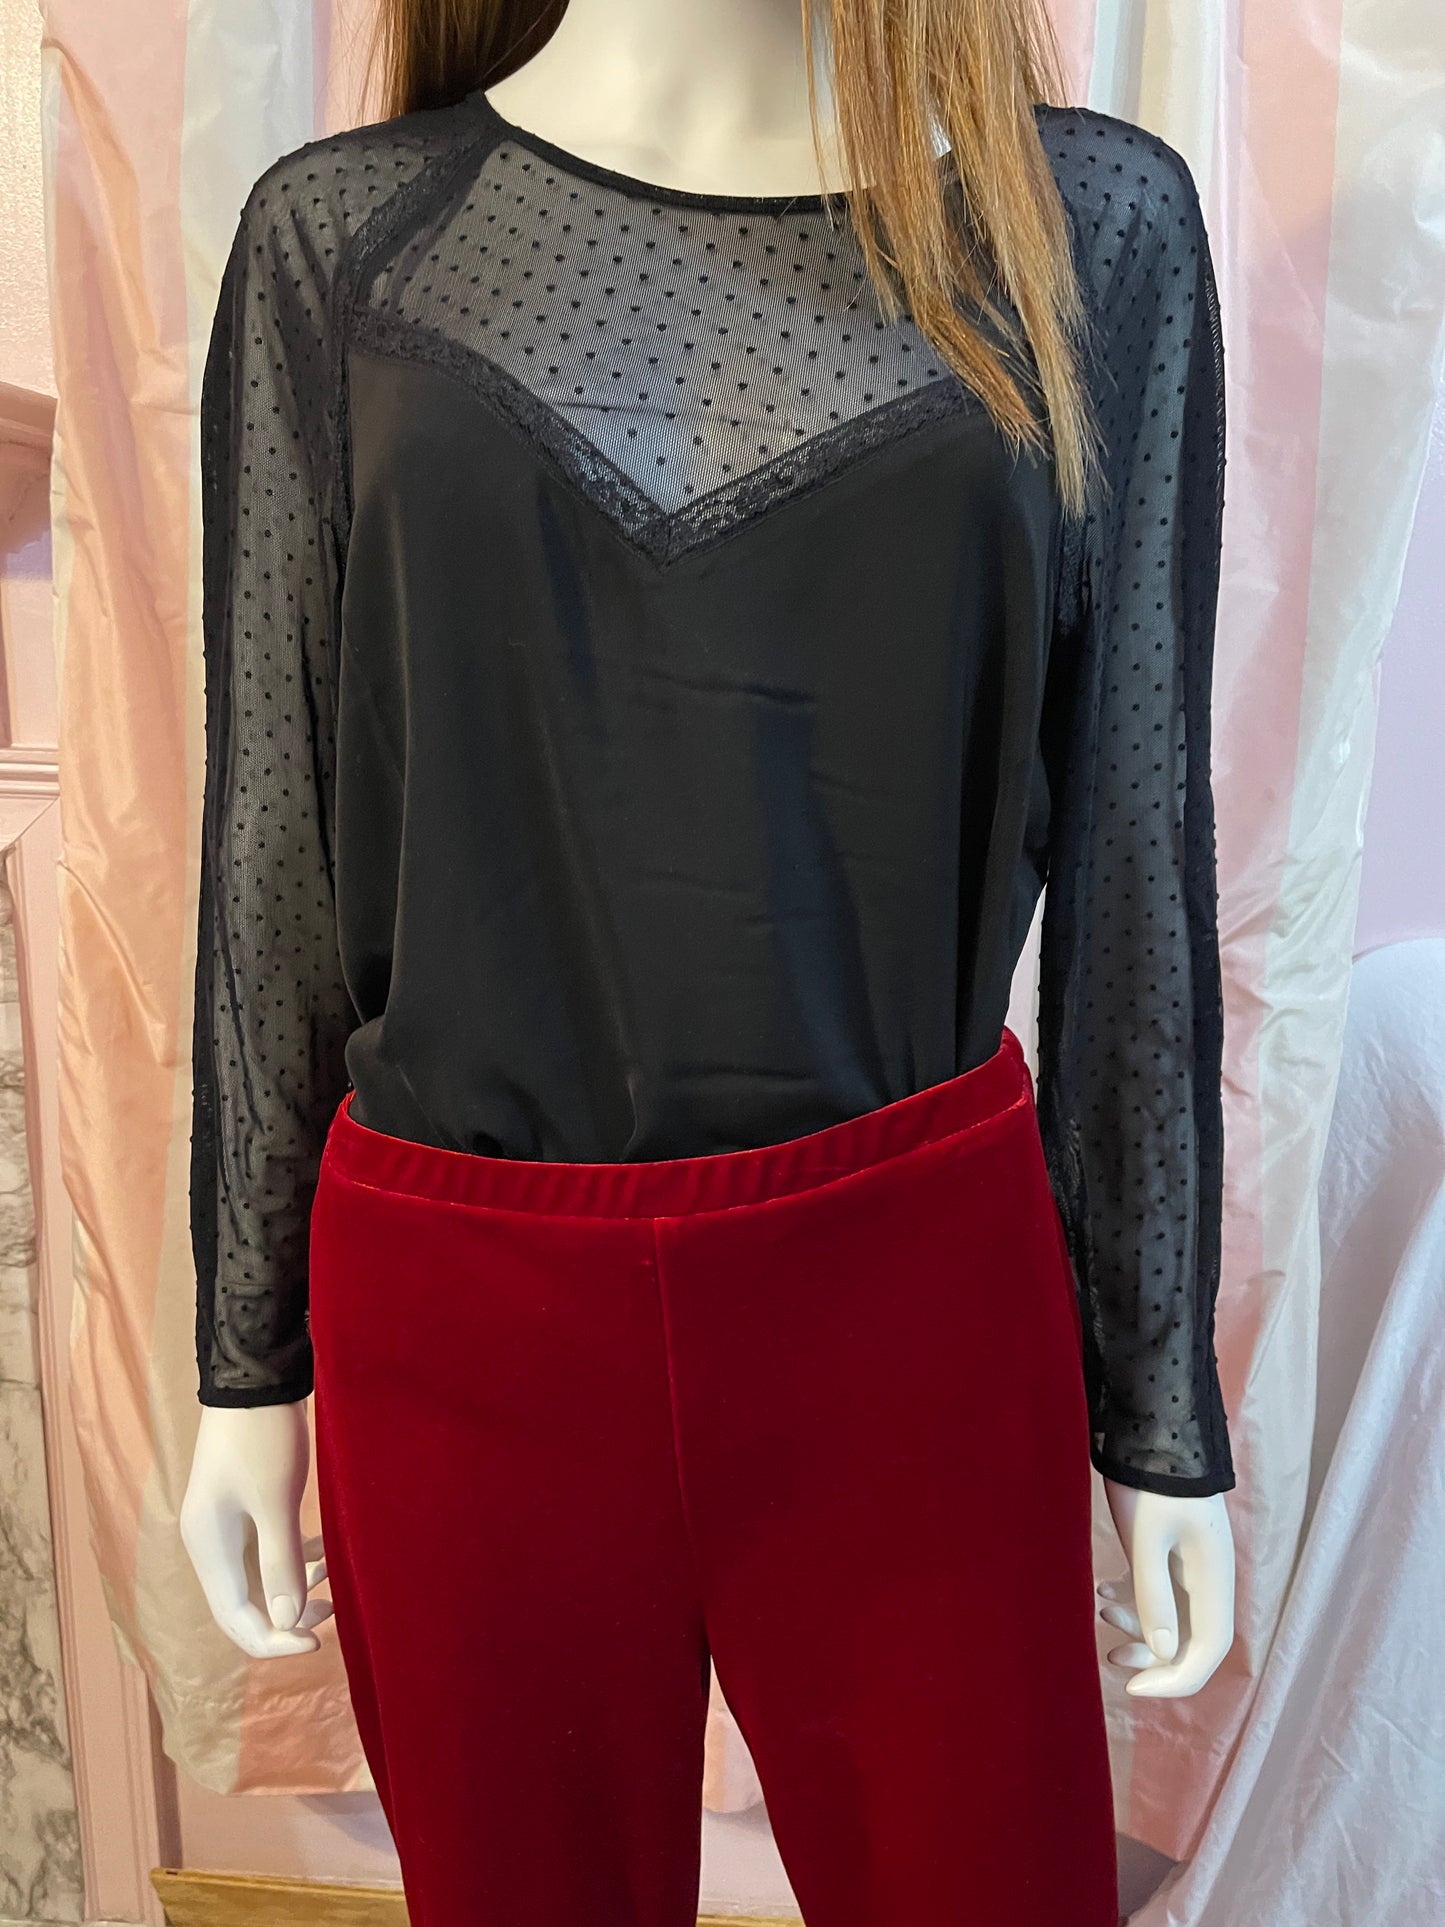 Black Lace Sheer Top and Red Velvet Pants